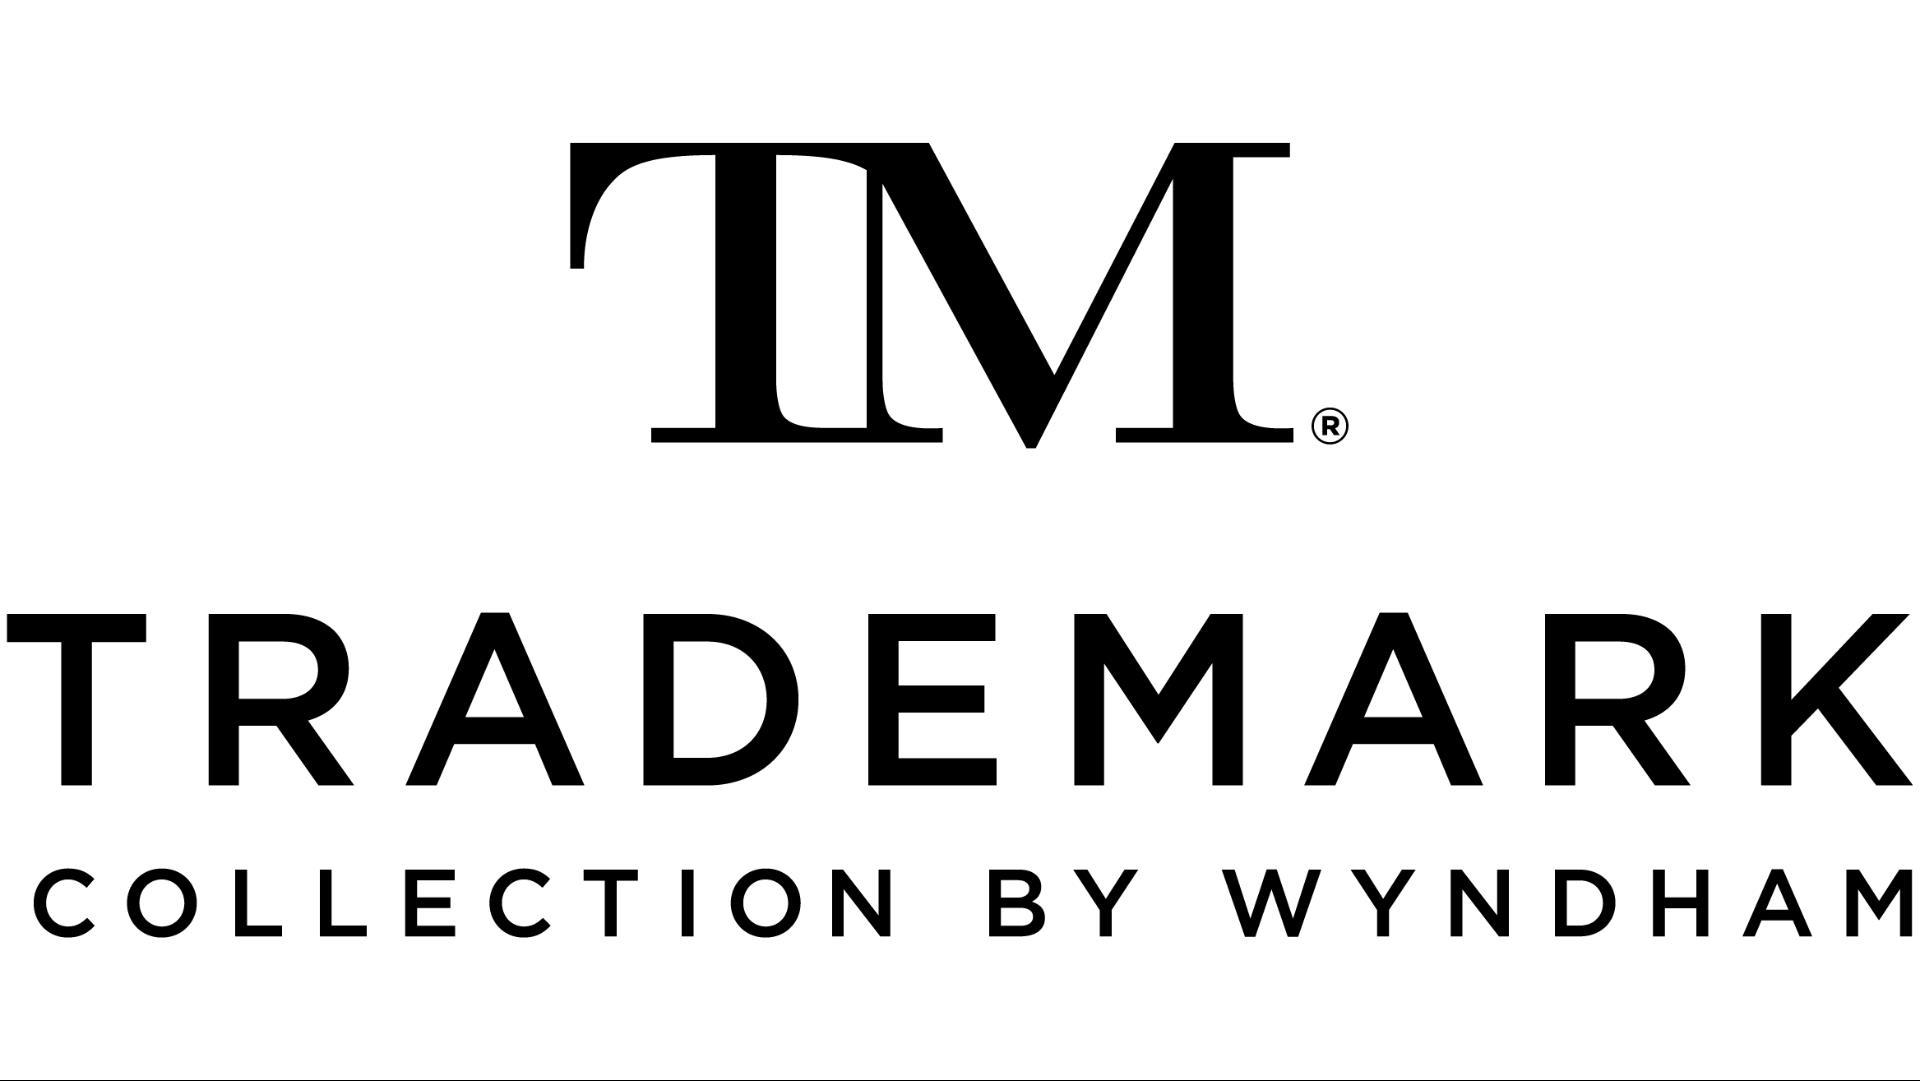 Broadway Plaza, Trademark Collection by Wyndham in Rochester, MN